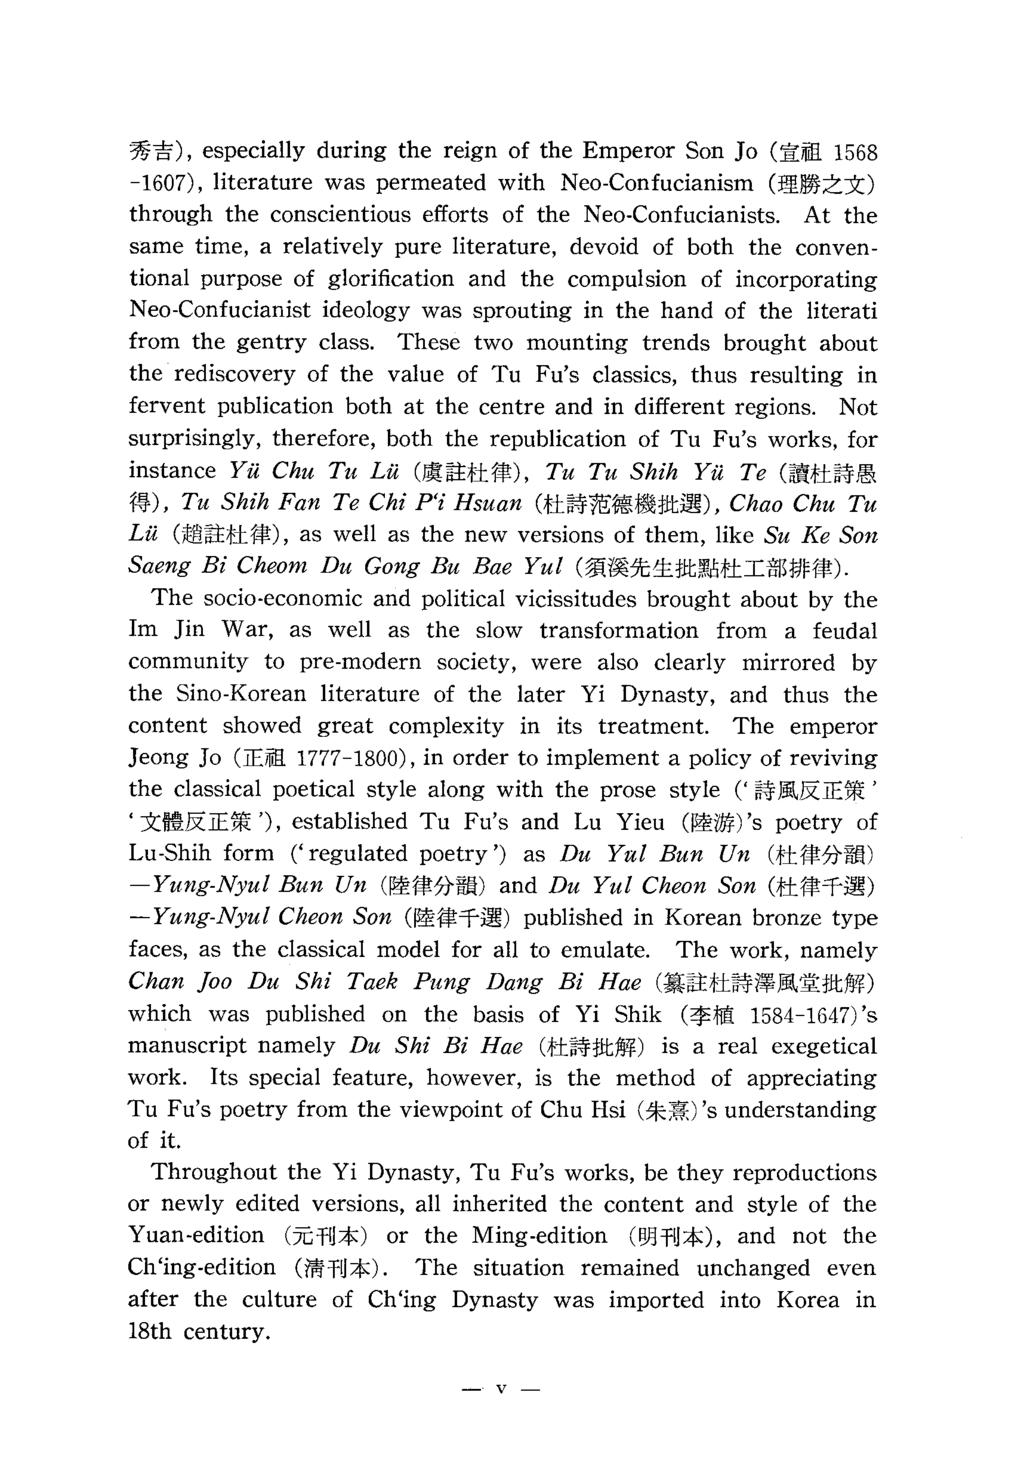 rsk), especially during the reign of the Emperor Son Jo (Ema 1568-1607), literature was permeated with Neo-Confucianism (mpms2isc) through the conscientious efforts of the Neo-Confucianists.